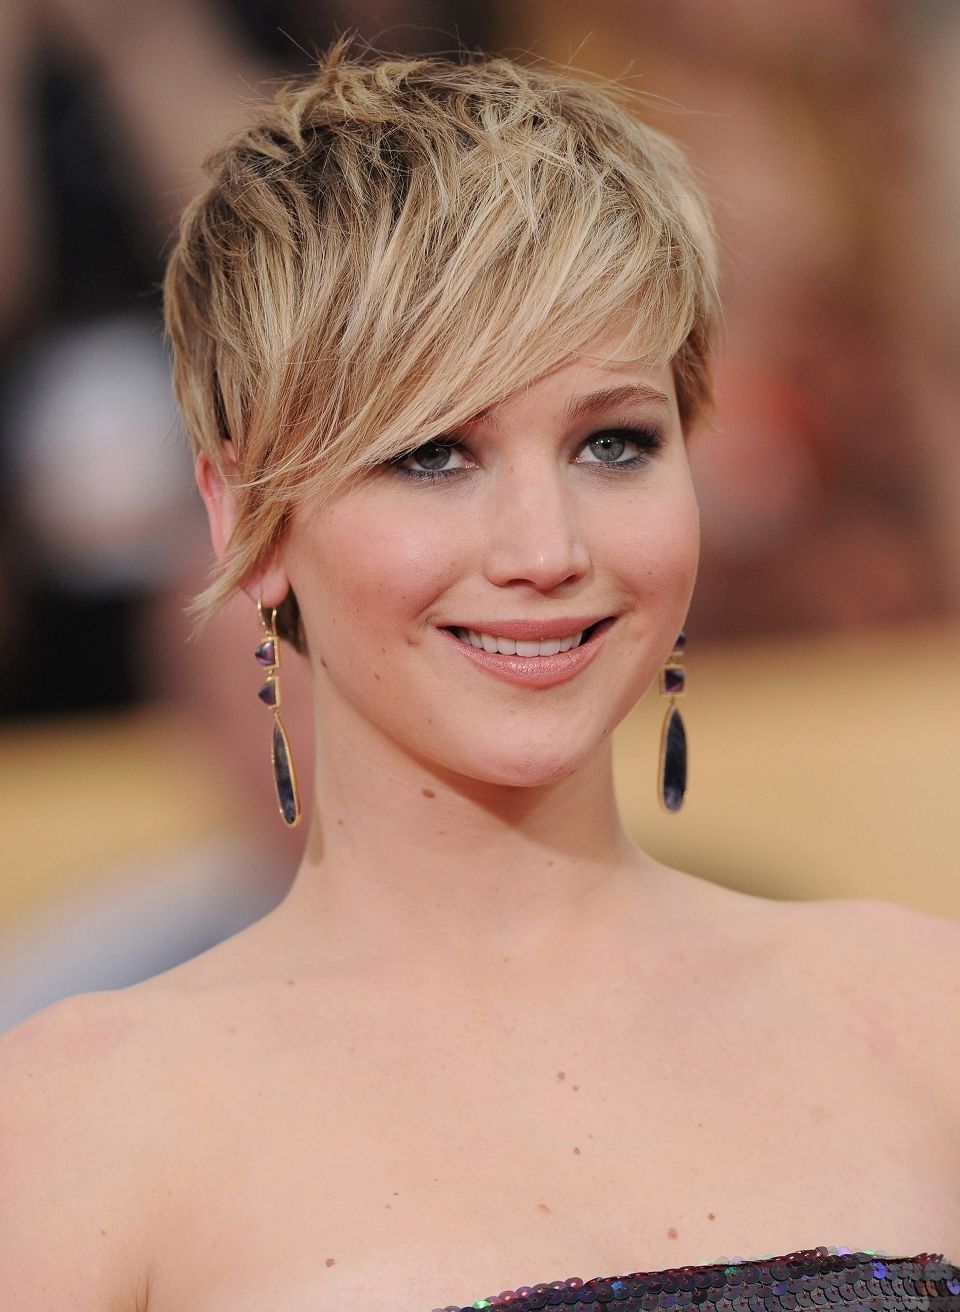 2017 Long Pixie Haircuts For Round Faces Asymmetrical Pixie Cuts In Best And Newest Pixie Hairstyles For Fat Faces (View 13 of 15)